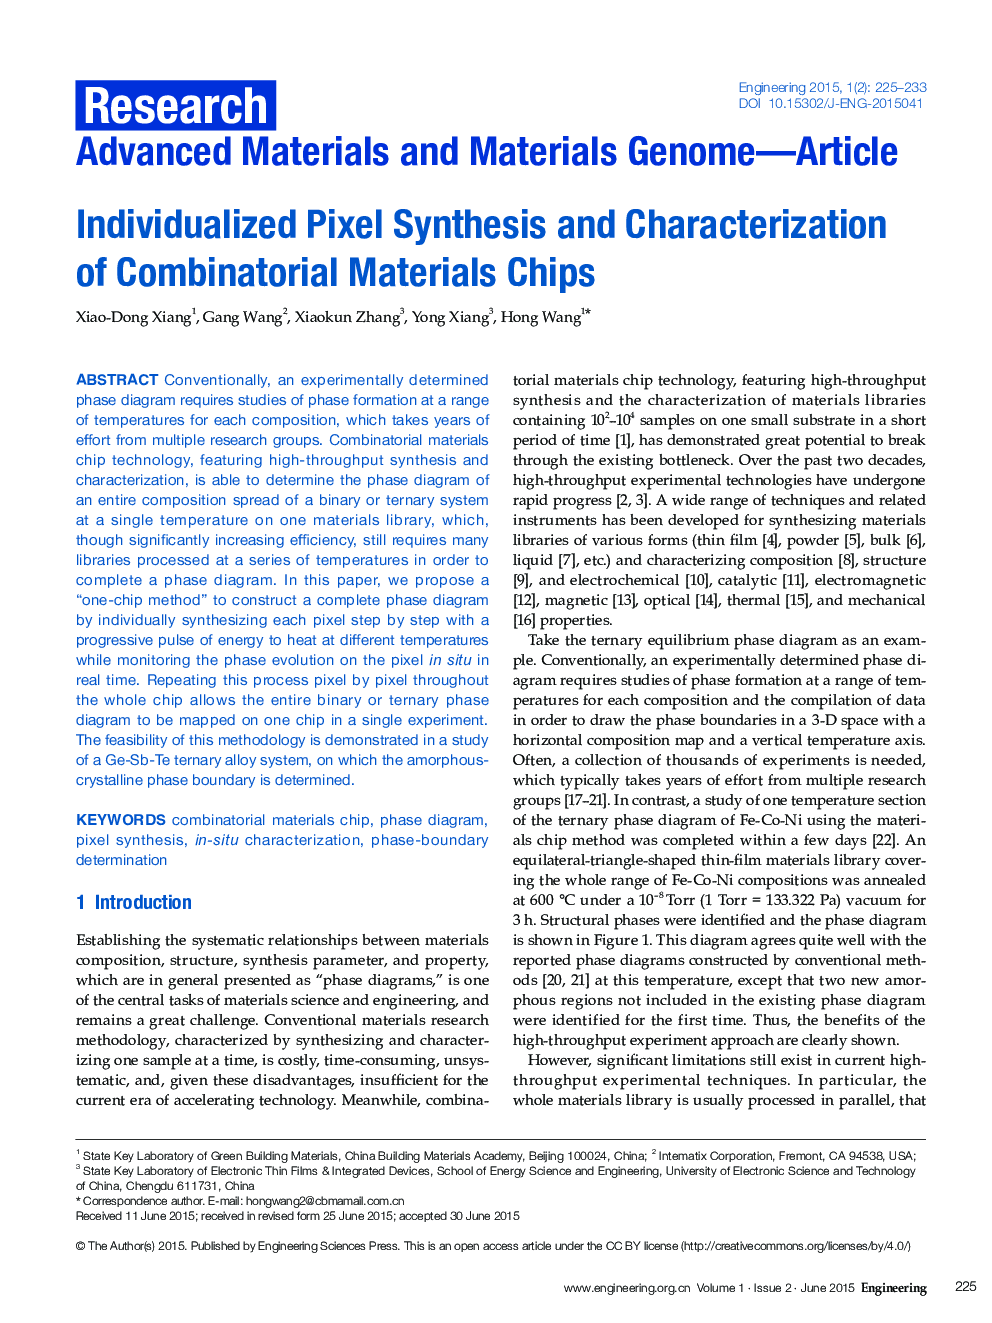 Individualized Pixel Synthesis and Characterization of Combinatorial Materials Chips